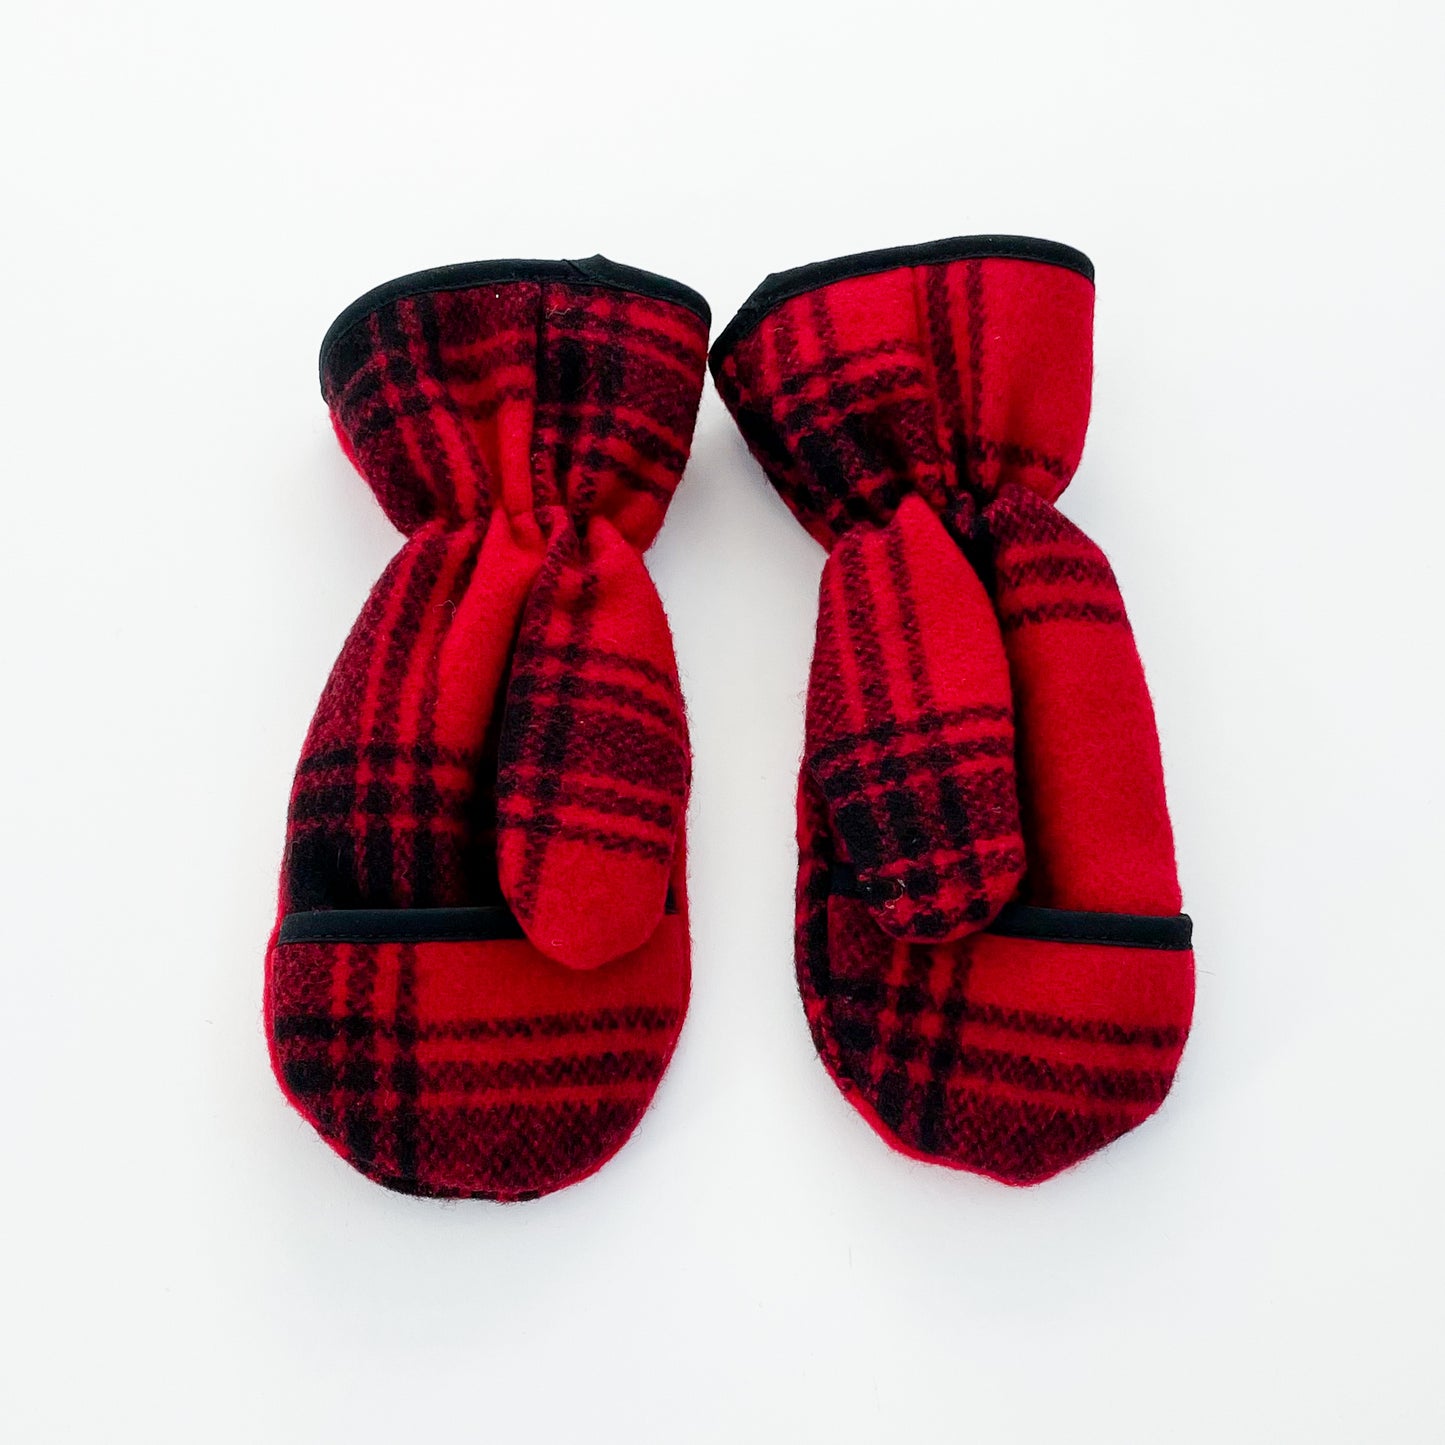 Johnson Woolen Mills mitten - red and black large plaid - with finger flap - back view 